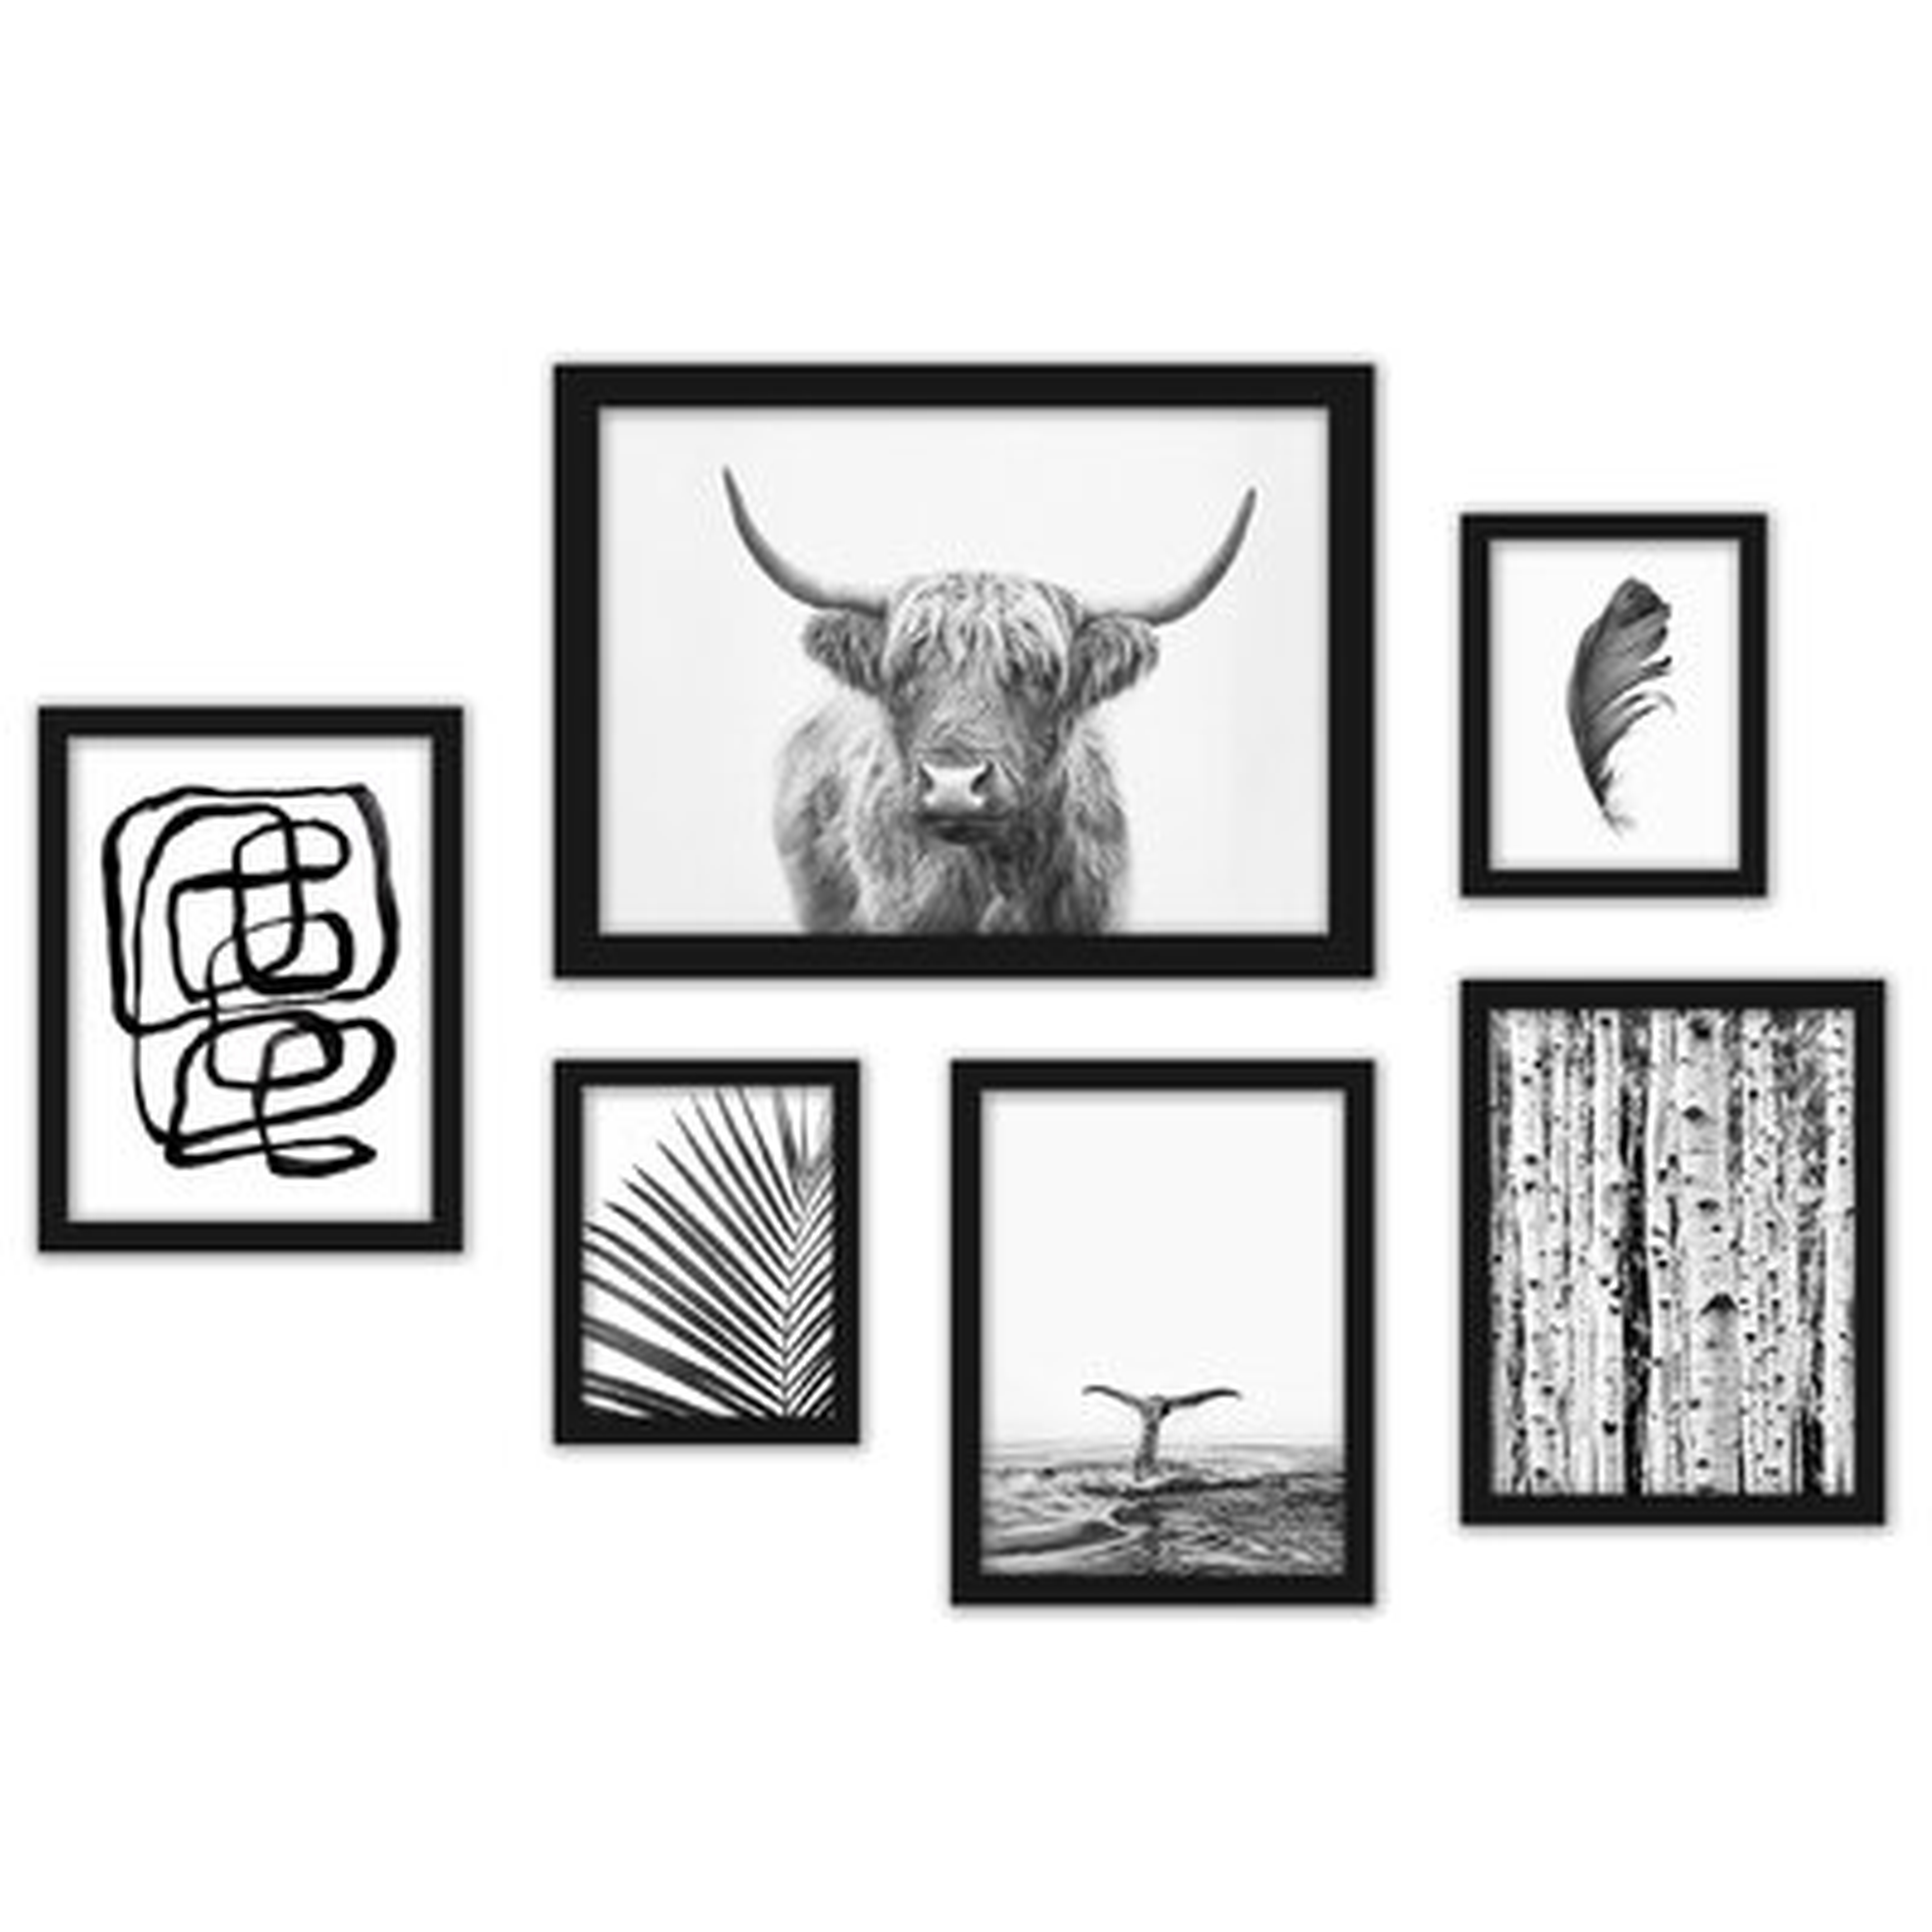 By Sisi and Seb - 6 Piece Picture Frame Graphic Art Print Set on Paper - Wayfair